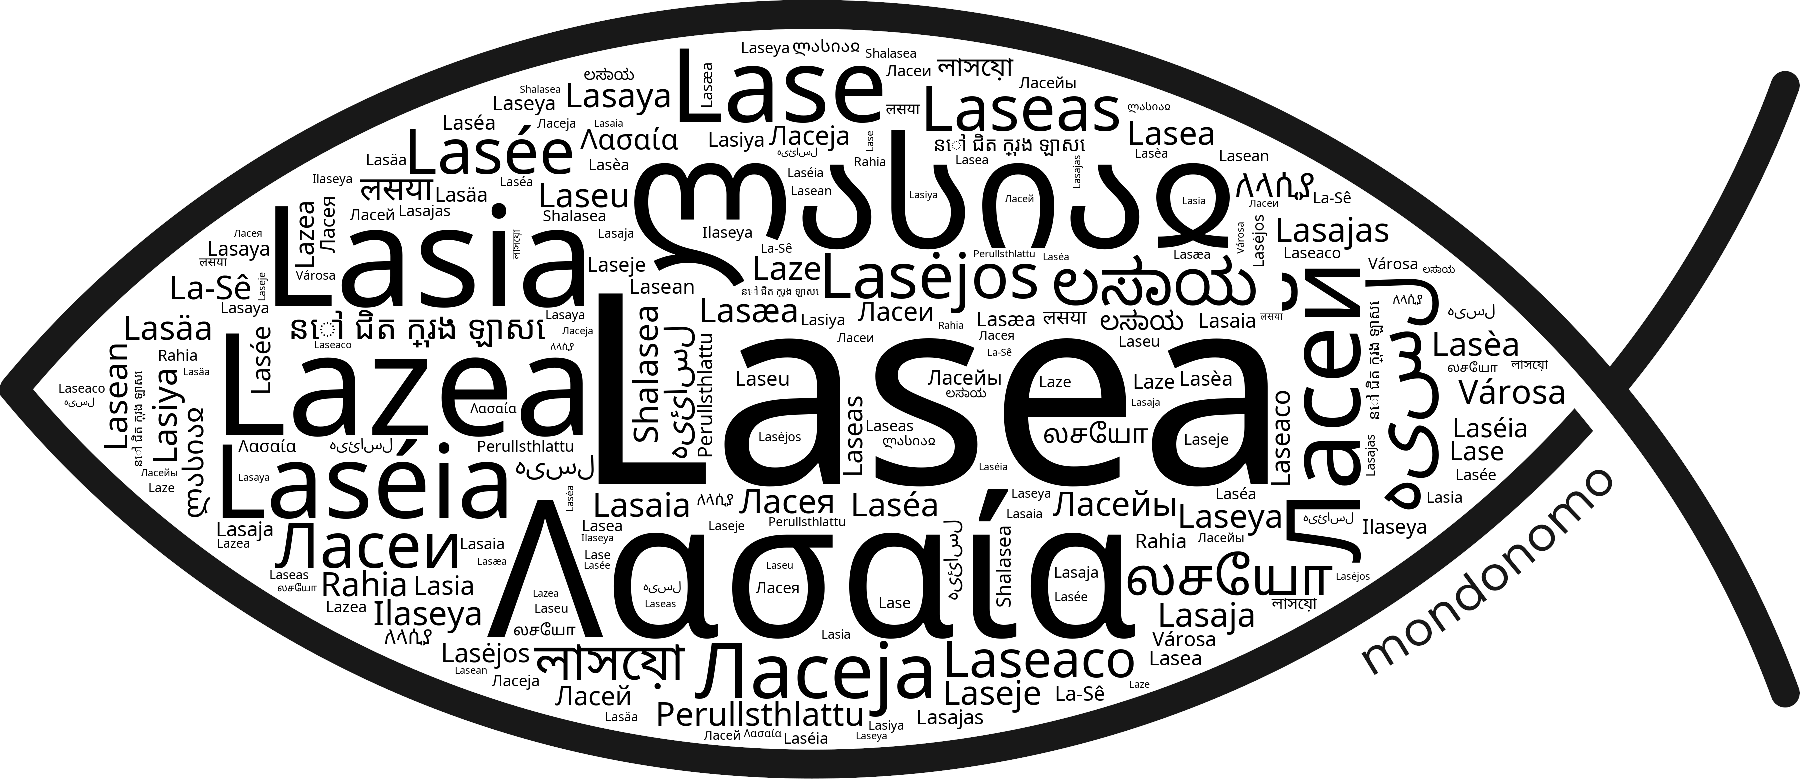 Name Lasea in the world's Bibles